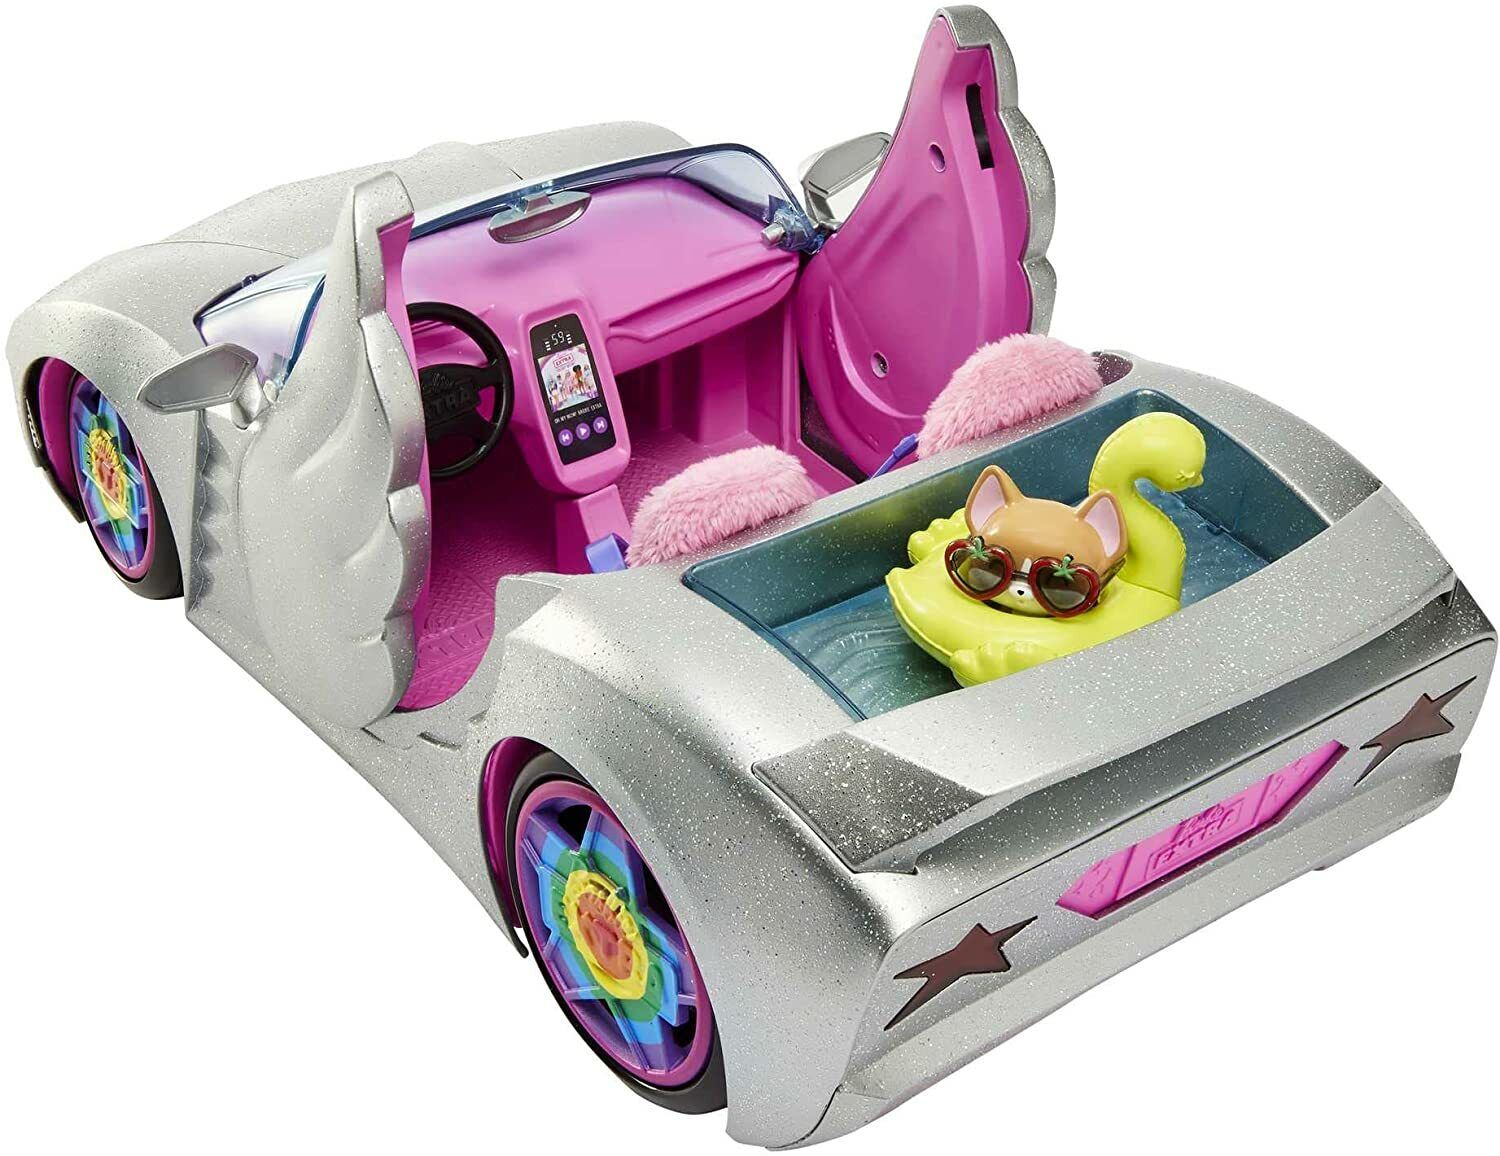 Barbie EXTRA Vehicle, Sparkly Silver 2-Seater Car with Rolling